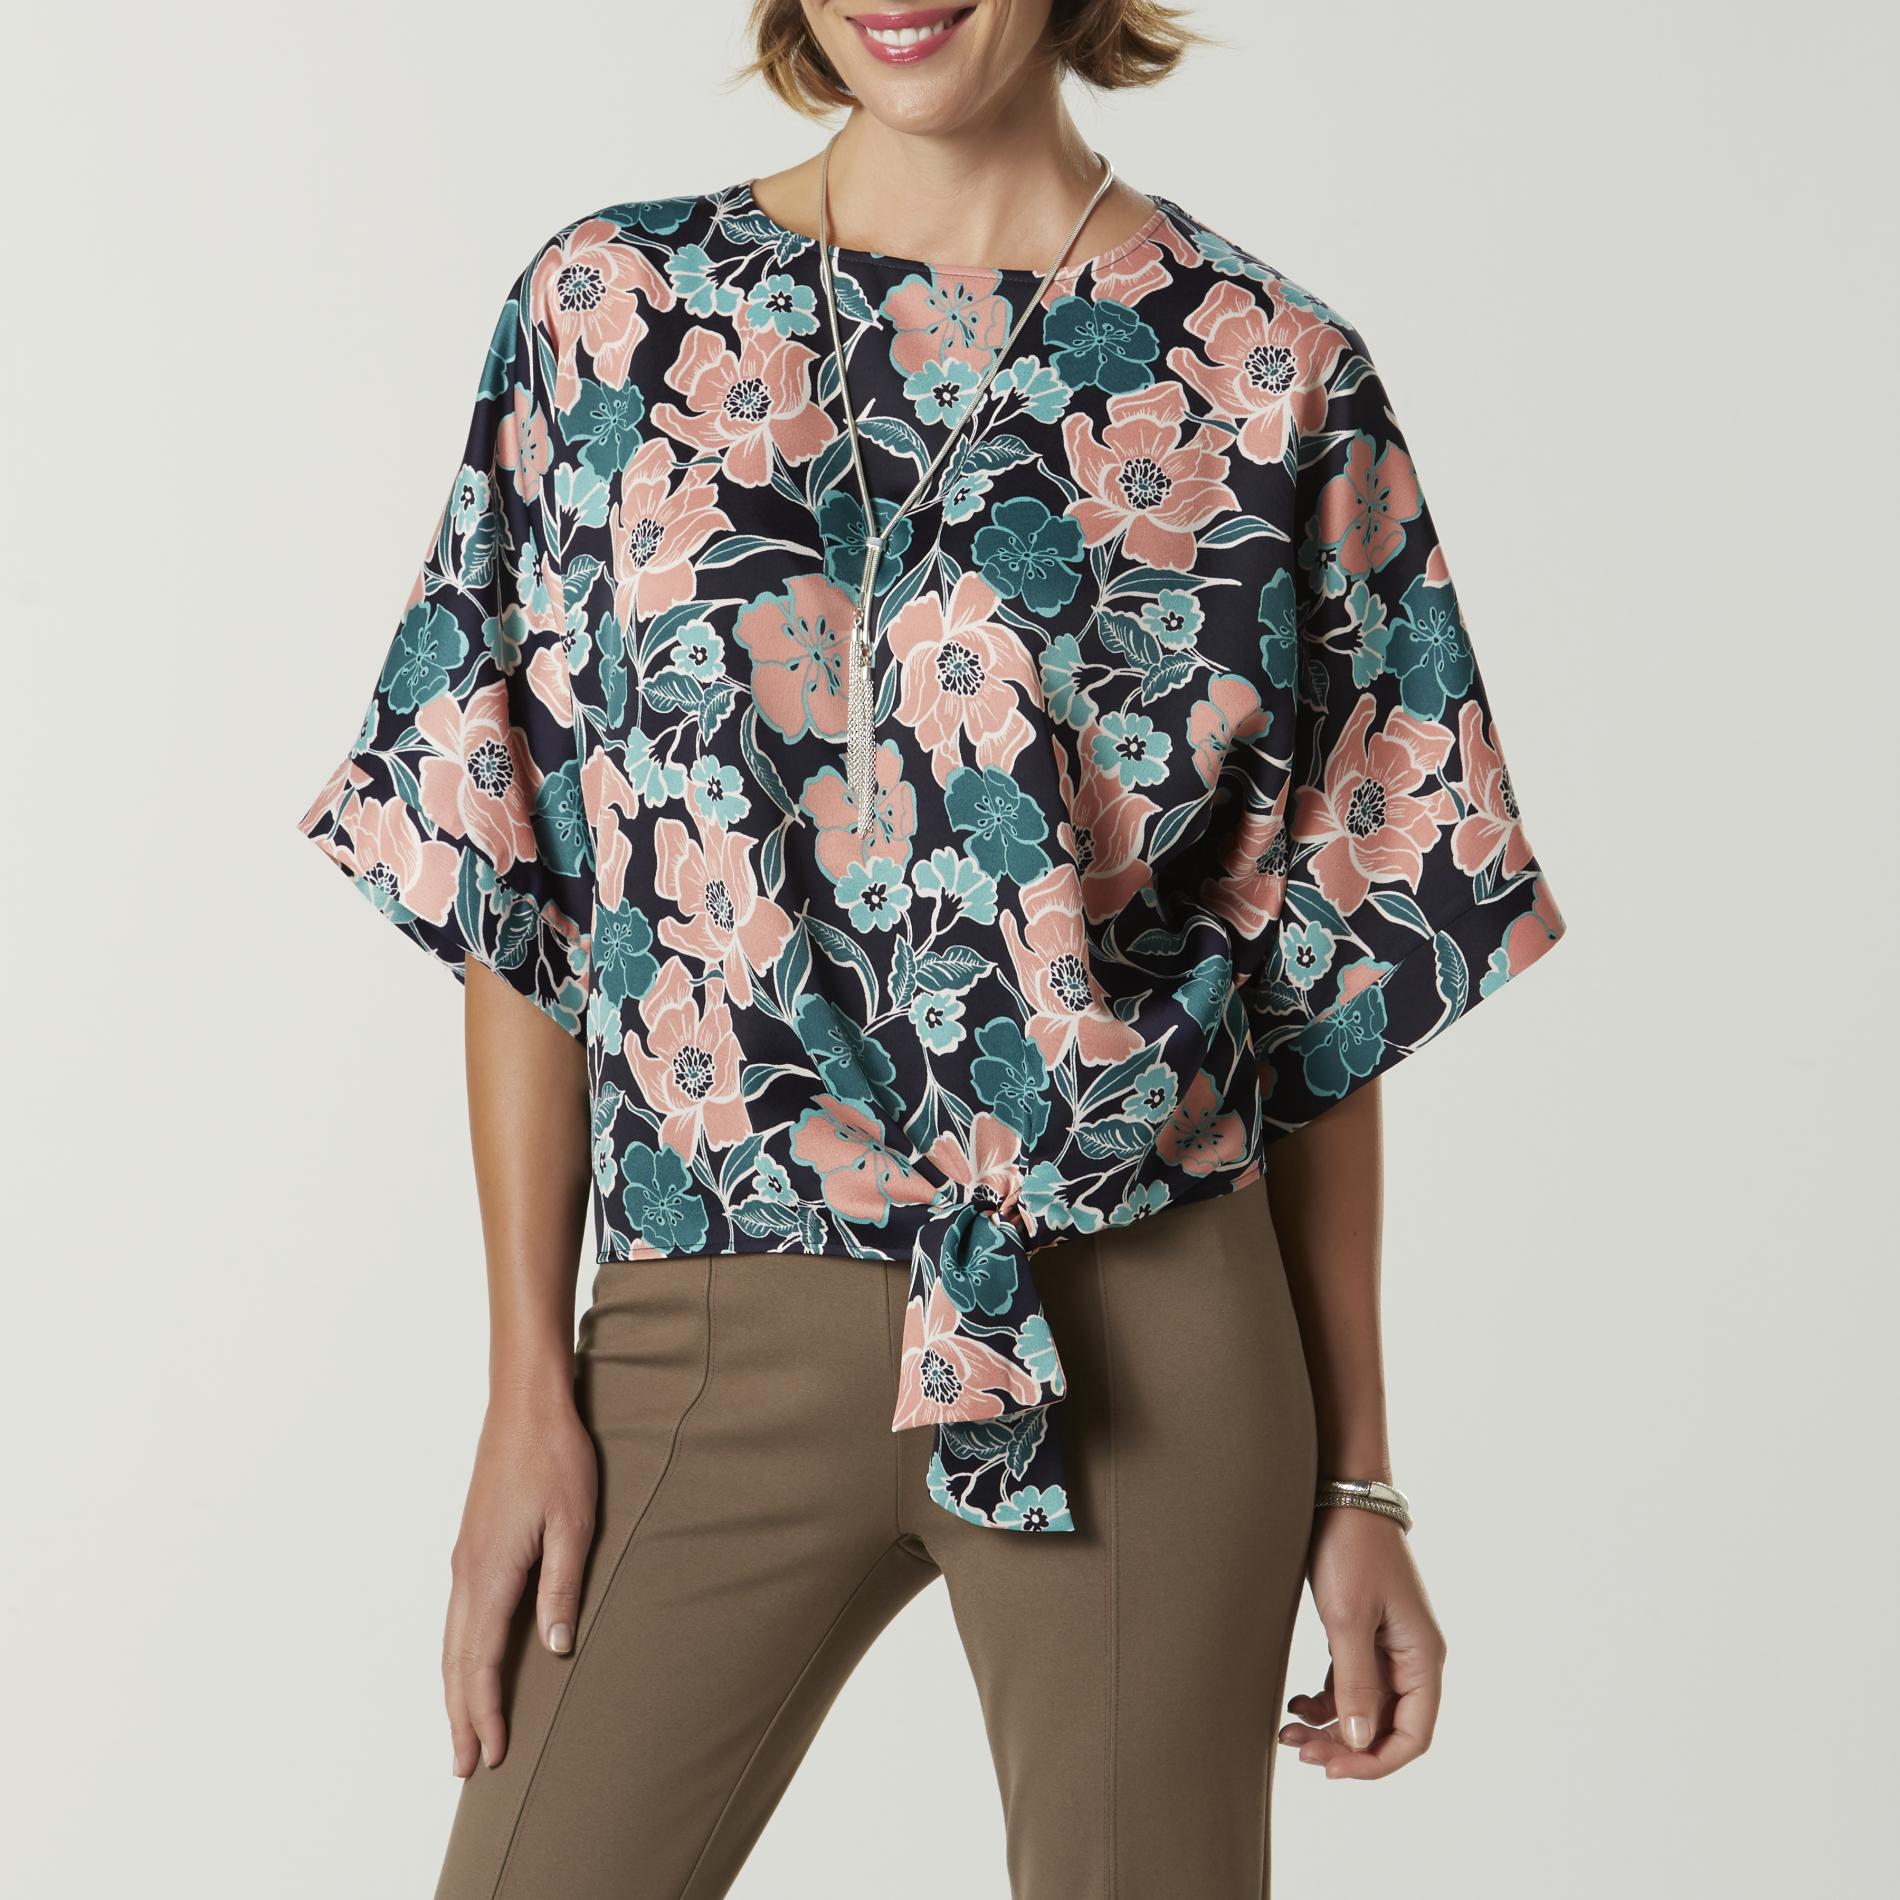 Jaclyn Smith Women's Knotted Blouse - Floral